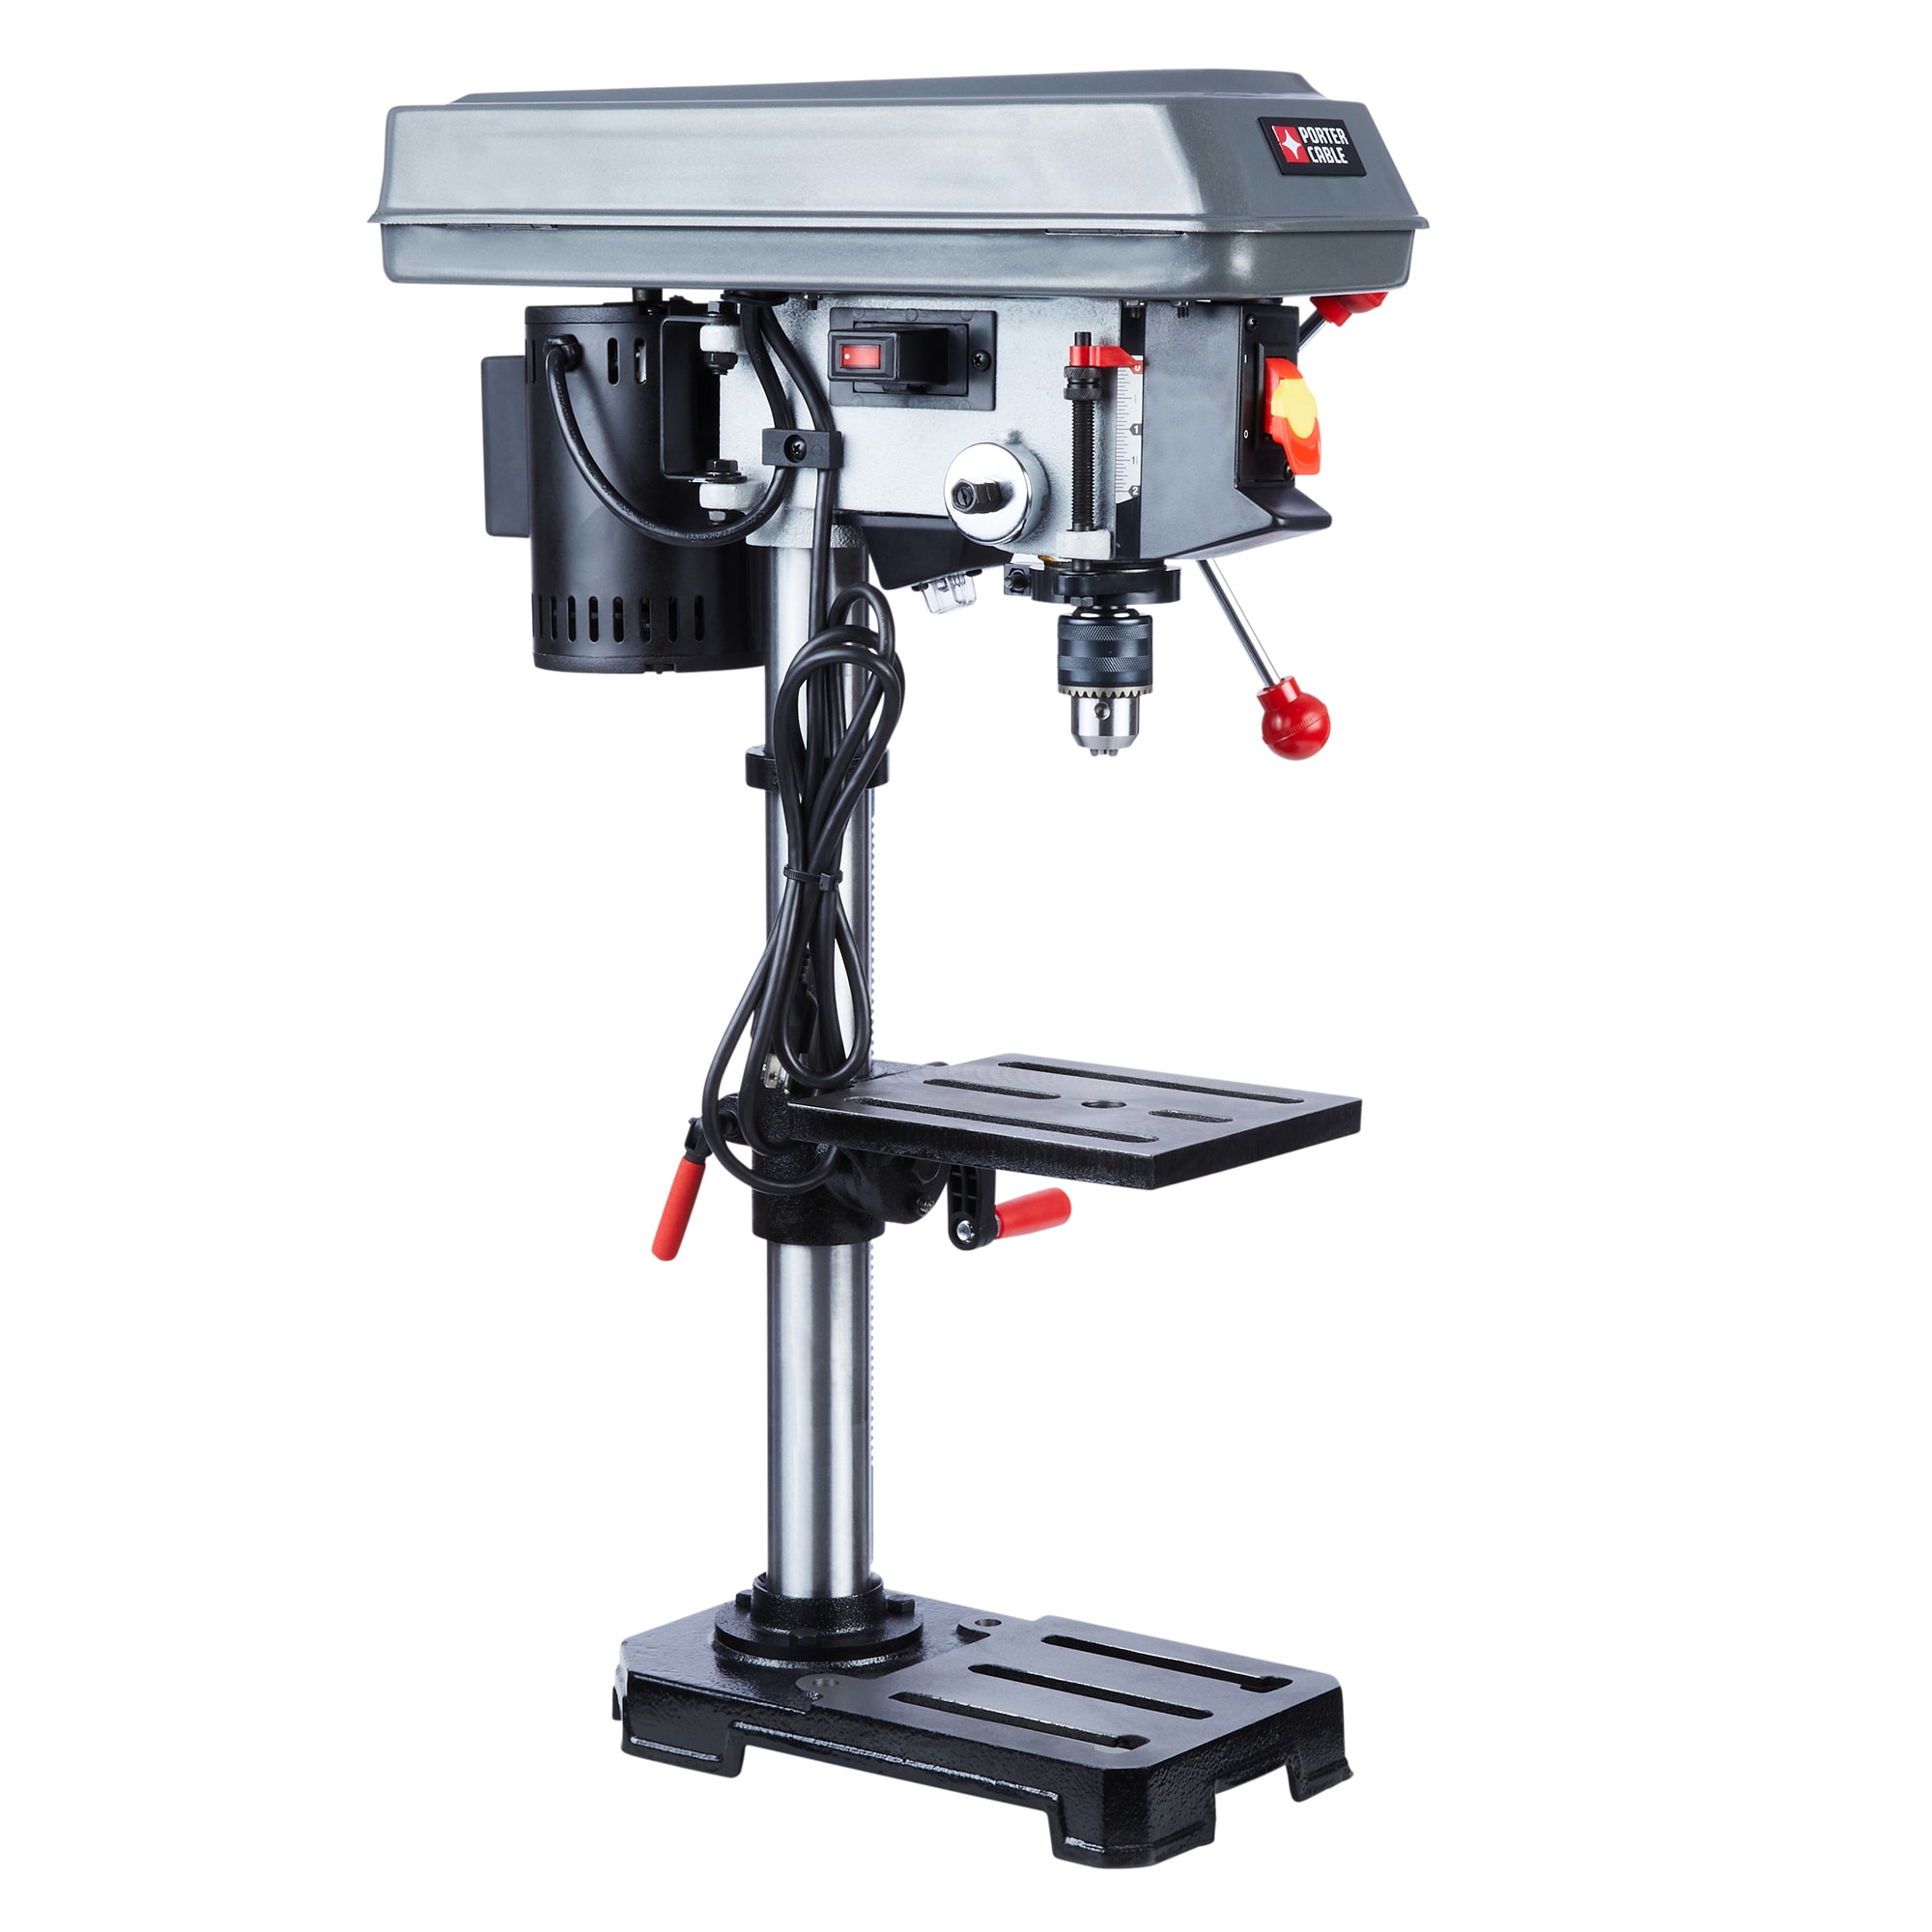 PORTER-CABLE PCXB620DP 3.2-Amp 5-Speed Bench Drill Press - 2